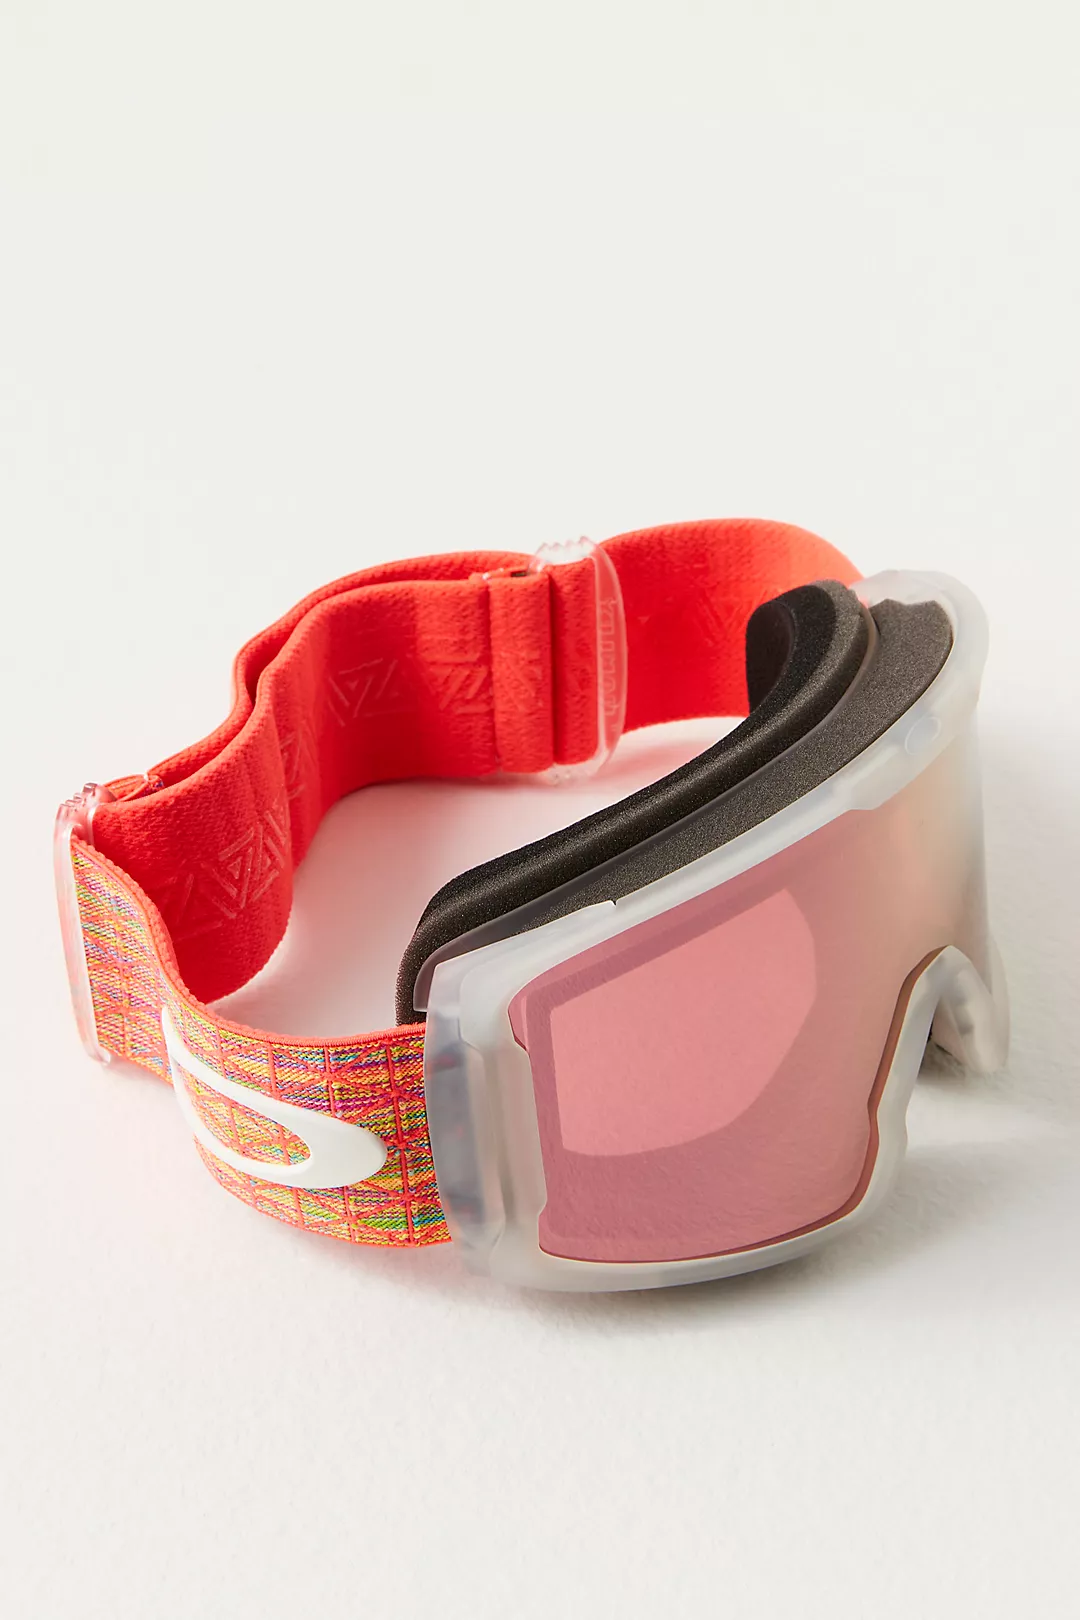 Oakley Line Miner Olympic Goggles